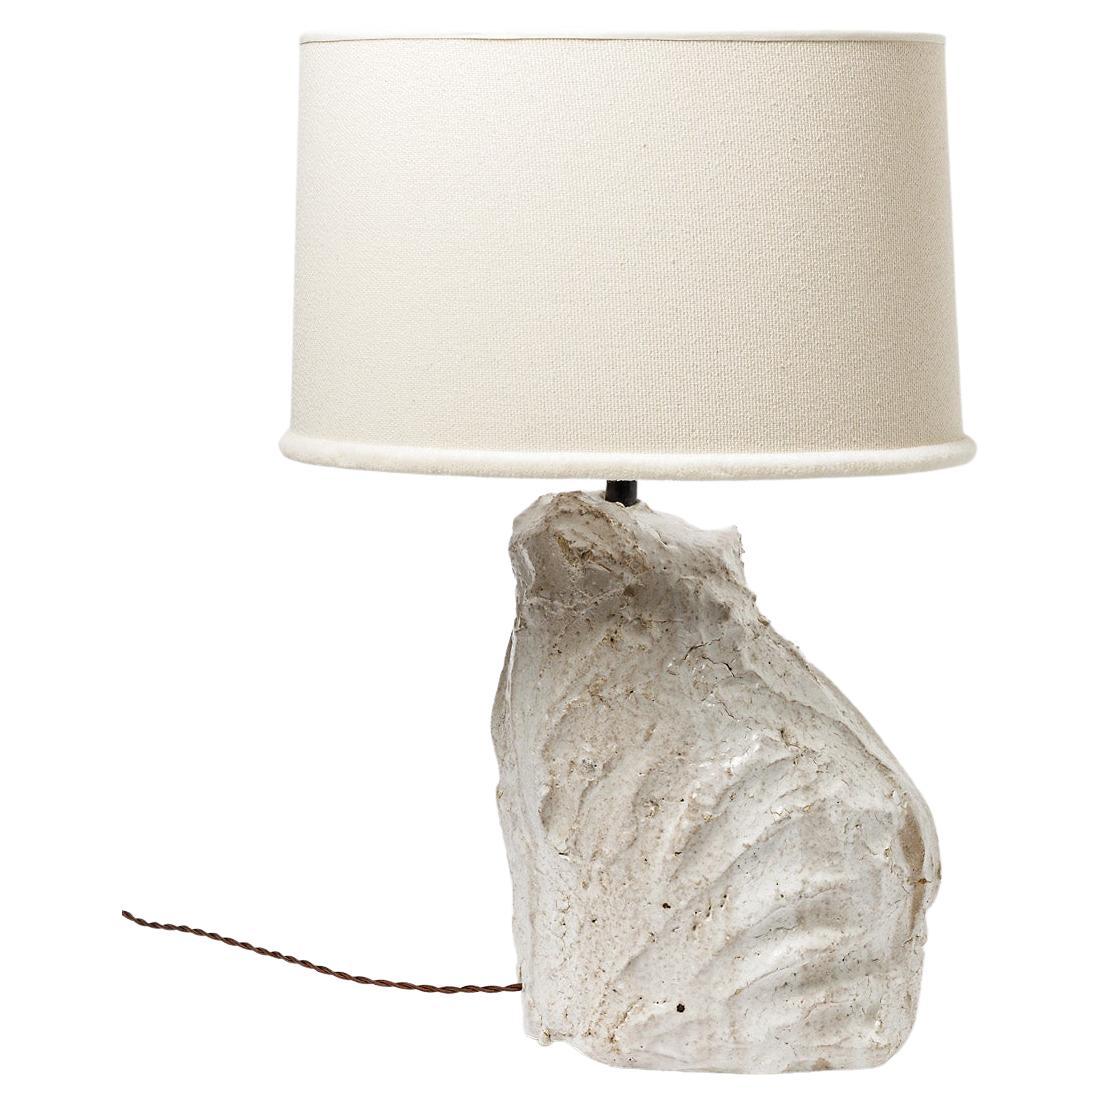 A ceramic table lamp with white glaze by Hervé Rousseau, 2022 / REF 5